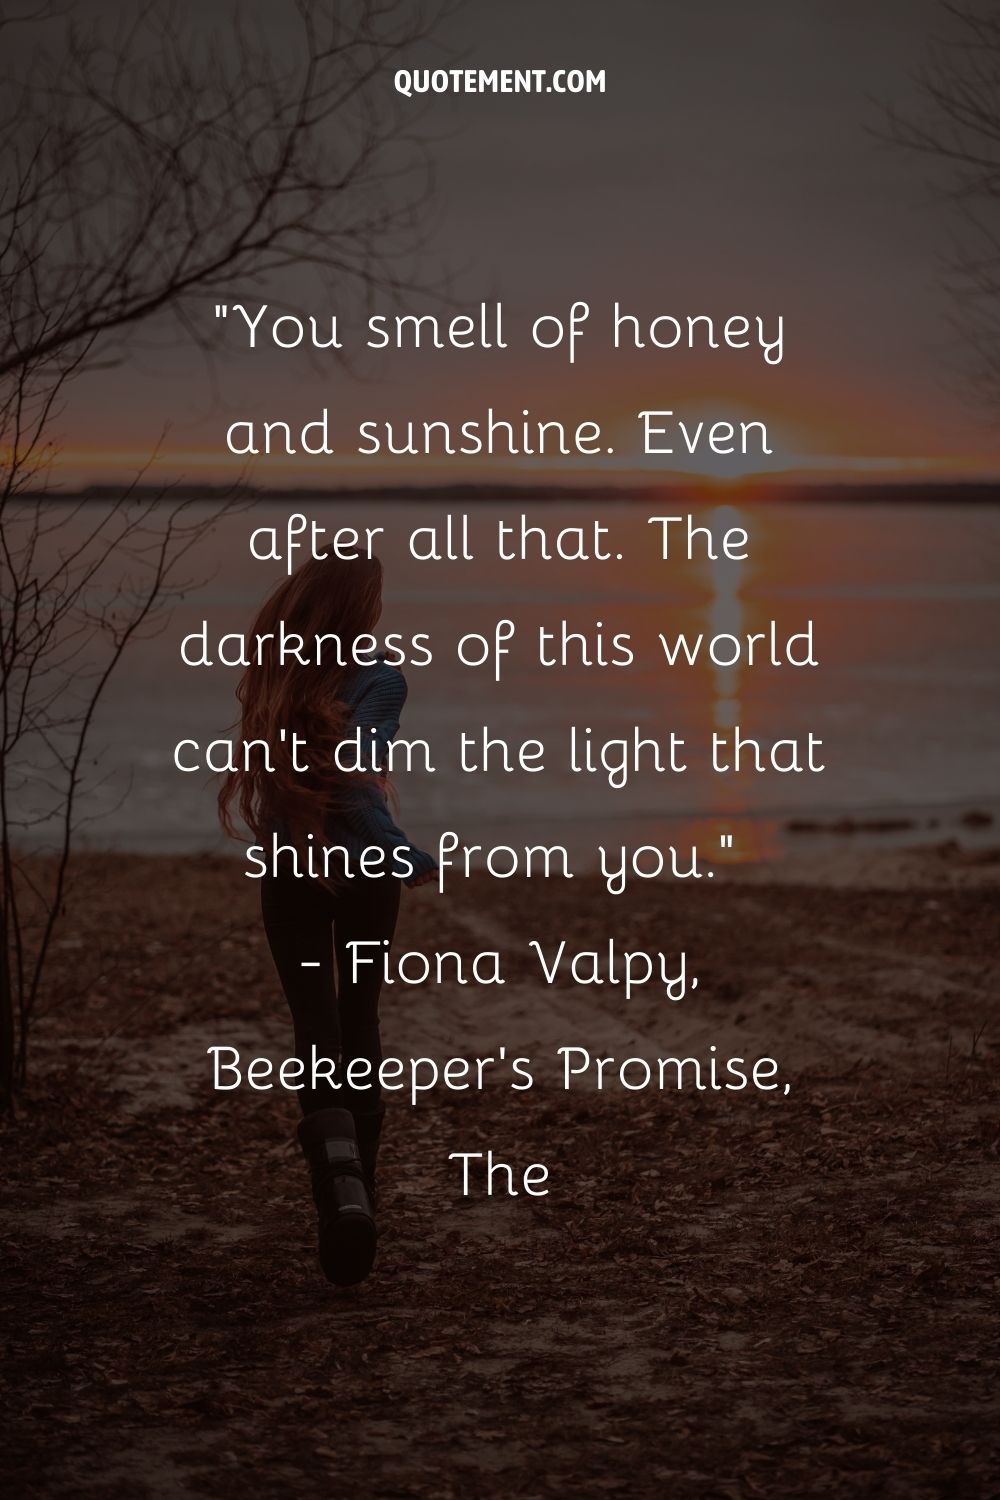 You smell of honey and sunshine. Even after all that. The darkness of this world can't dim the light that shines from you